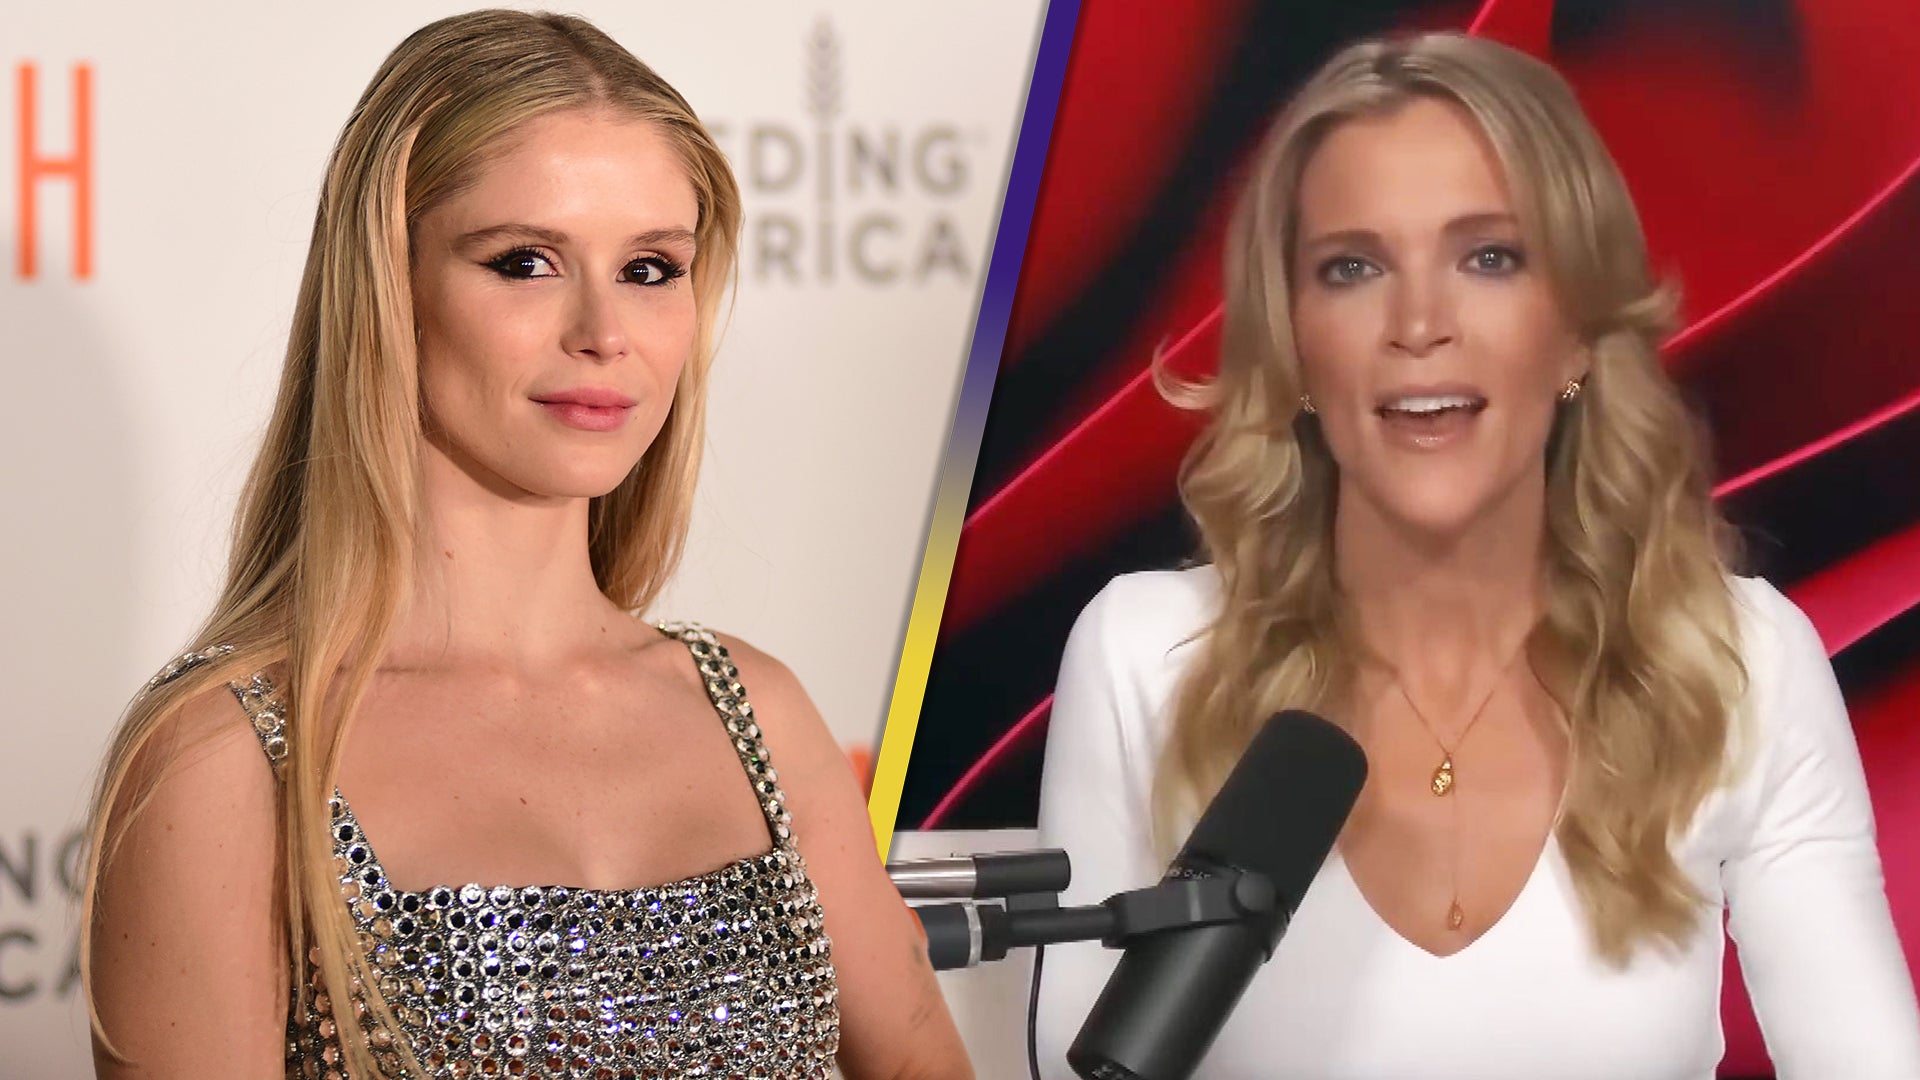 'The Boys' Star Erin Moriarty Quits Social Media After Megyn Kelly Rants About Her Looks   